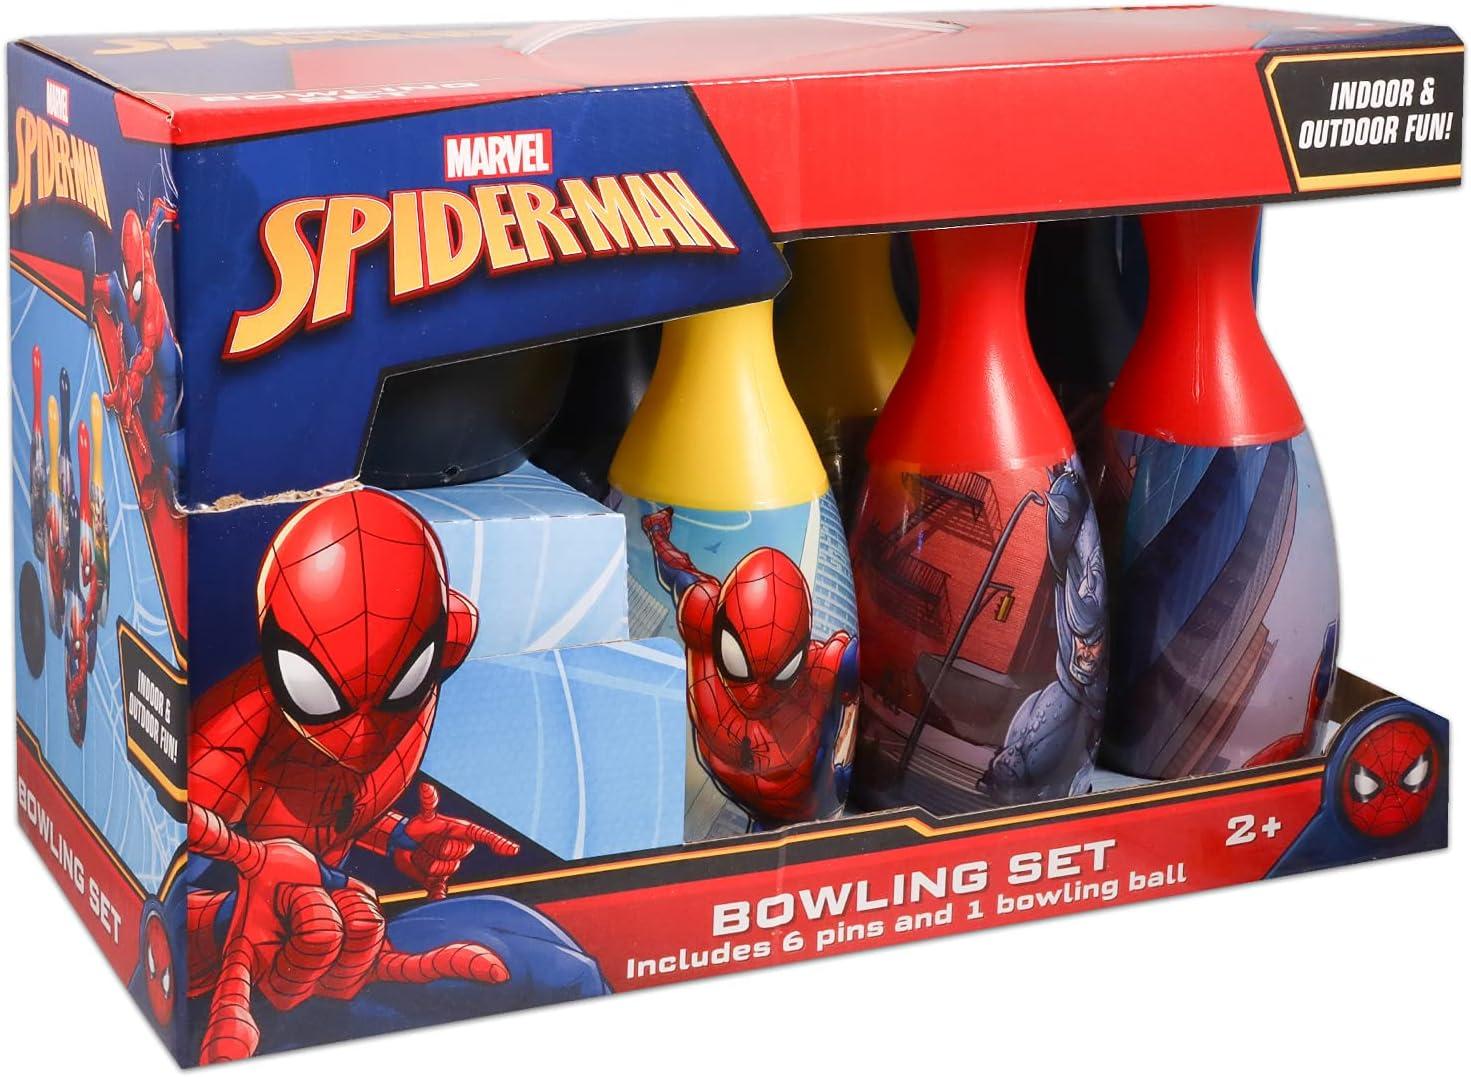 Marvel Spider-Man Basketball Size 6, Avengers Indoor and Outdoor